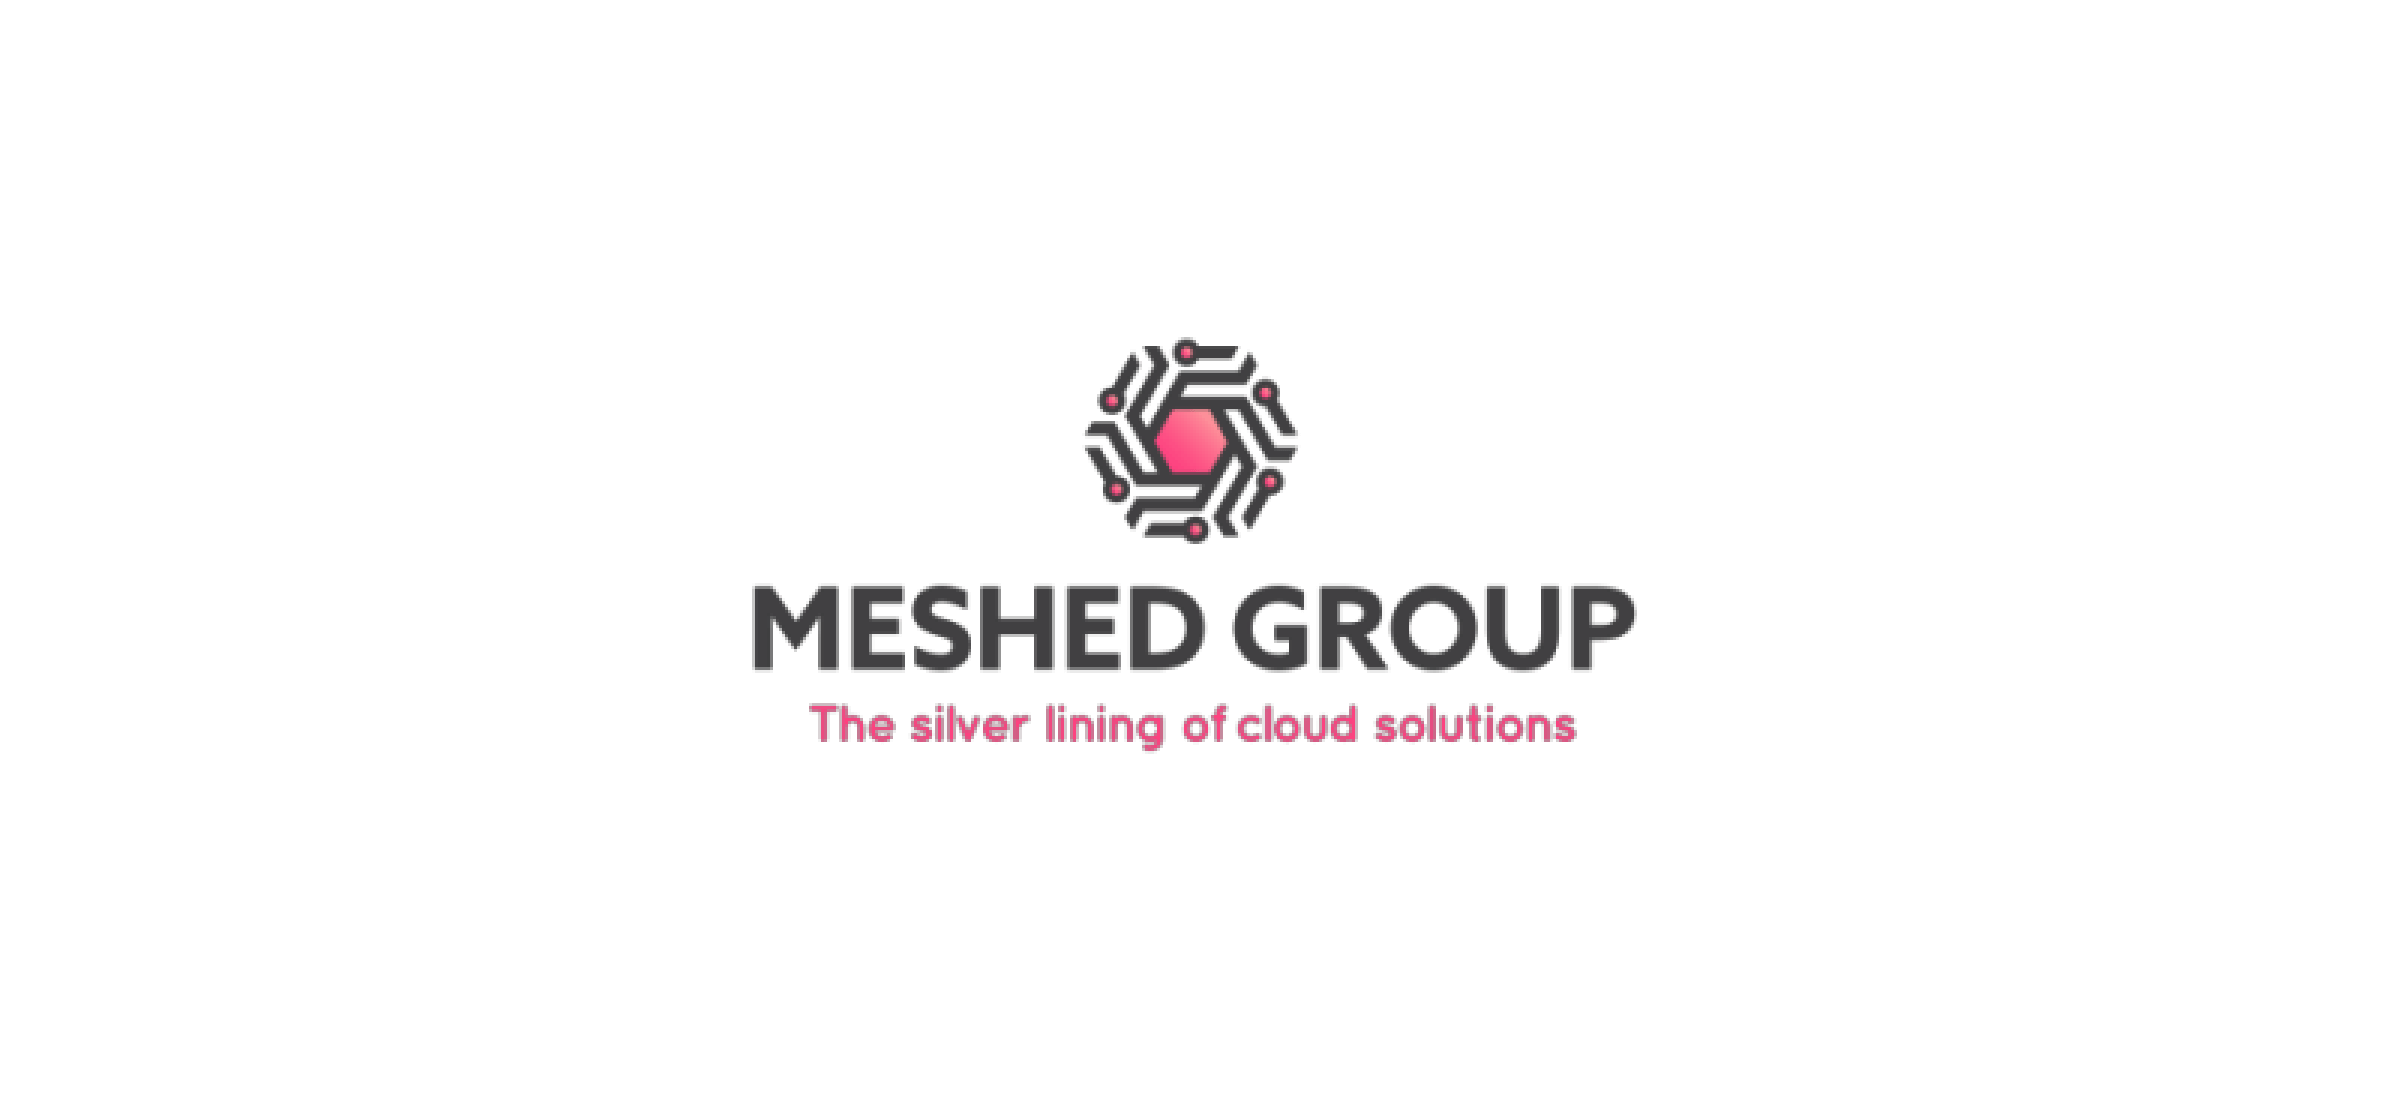 The Meshed Group logo